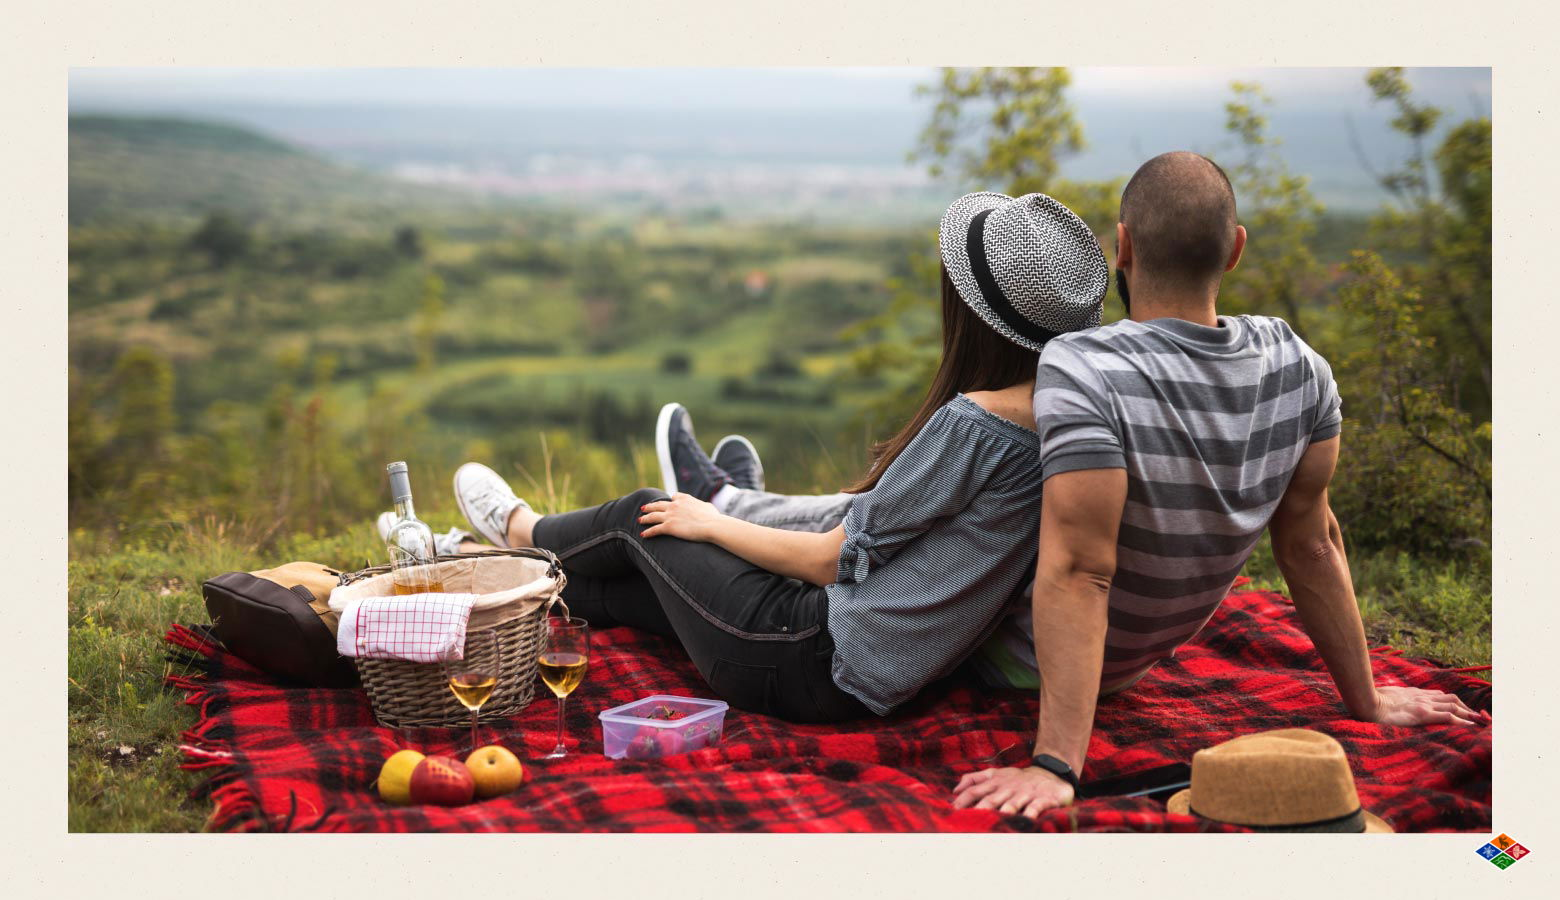 Summer picnic photo with a couple on a red and black plaid blanket overlooking the Smoky Mountains